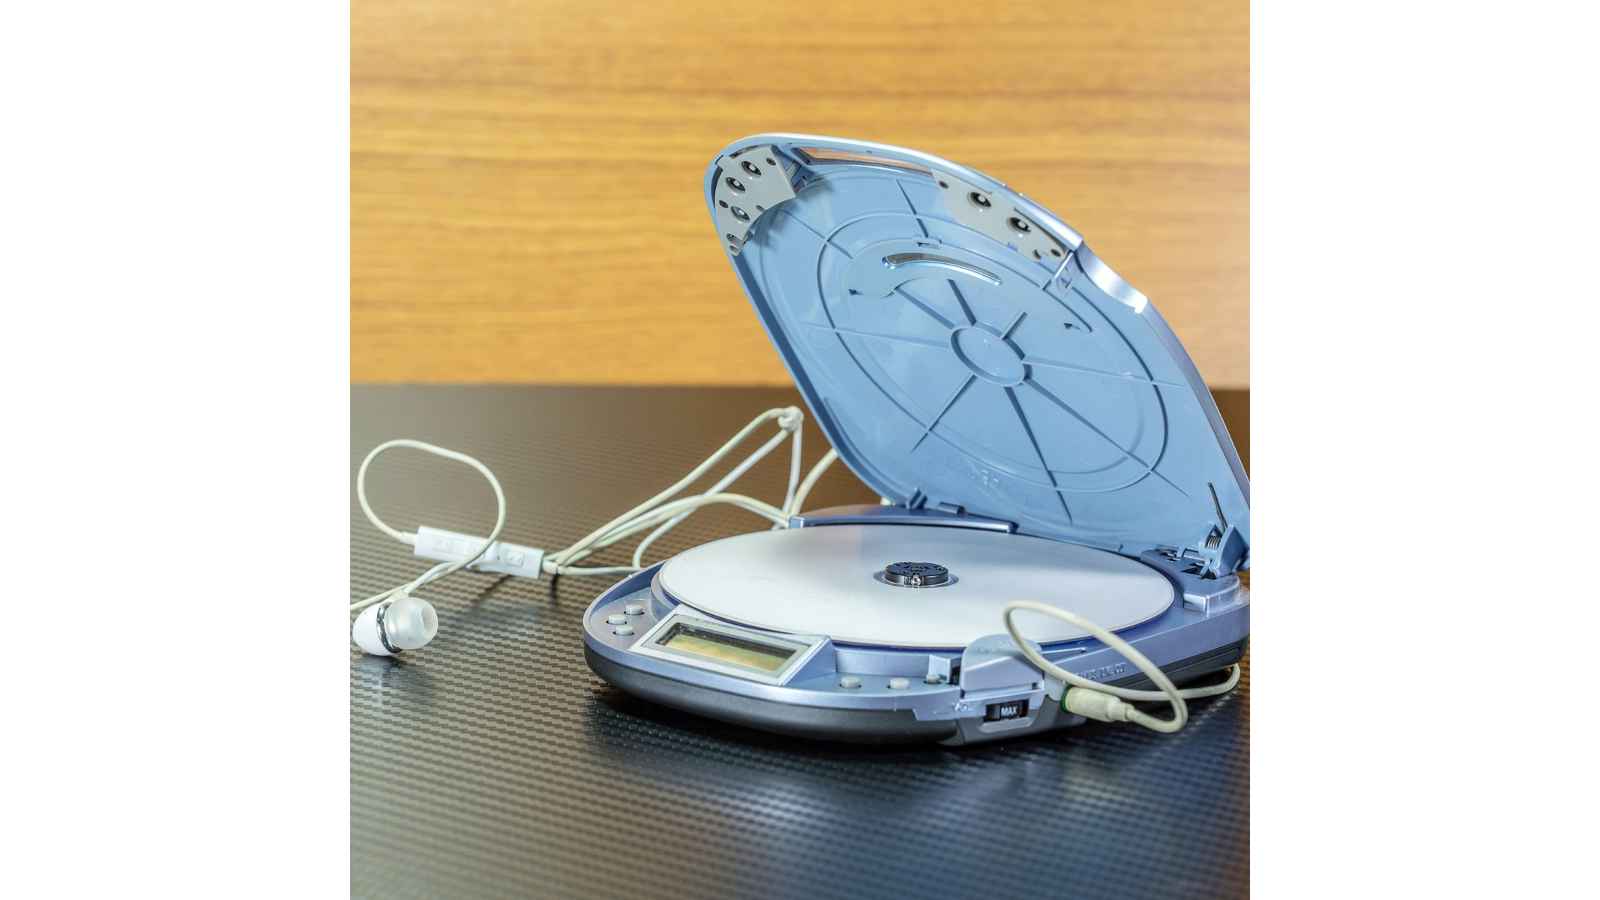 CD Player Day 2023: Date, History, Facts about Electronic Devices